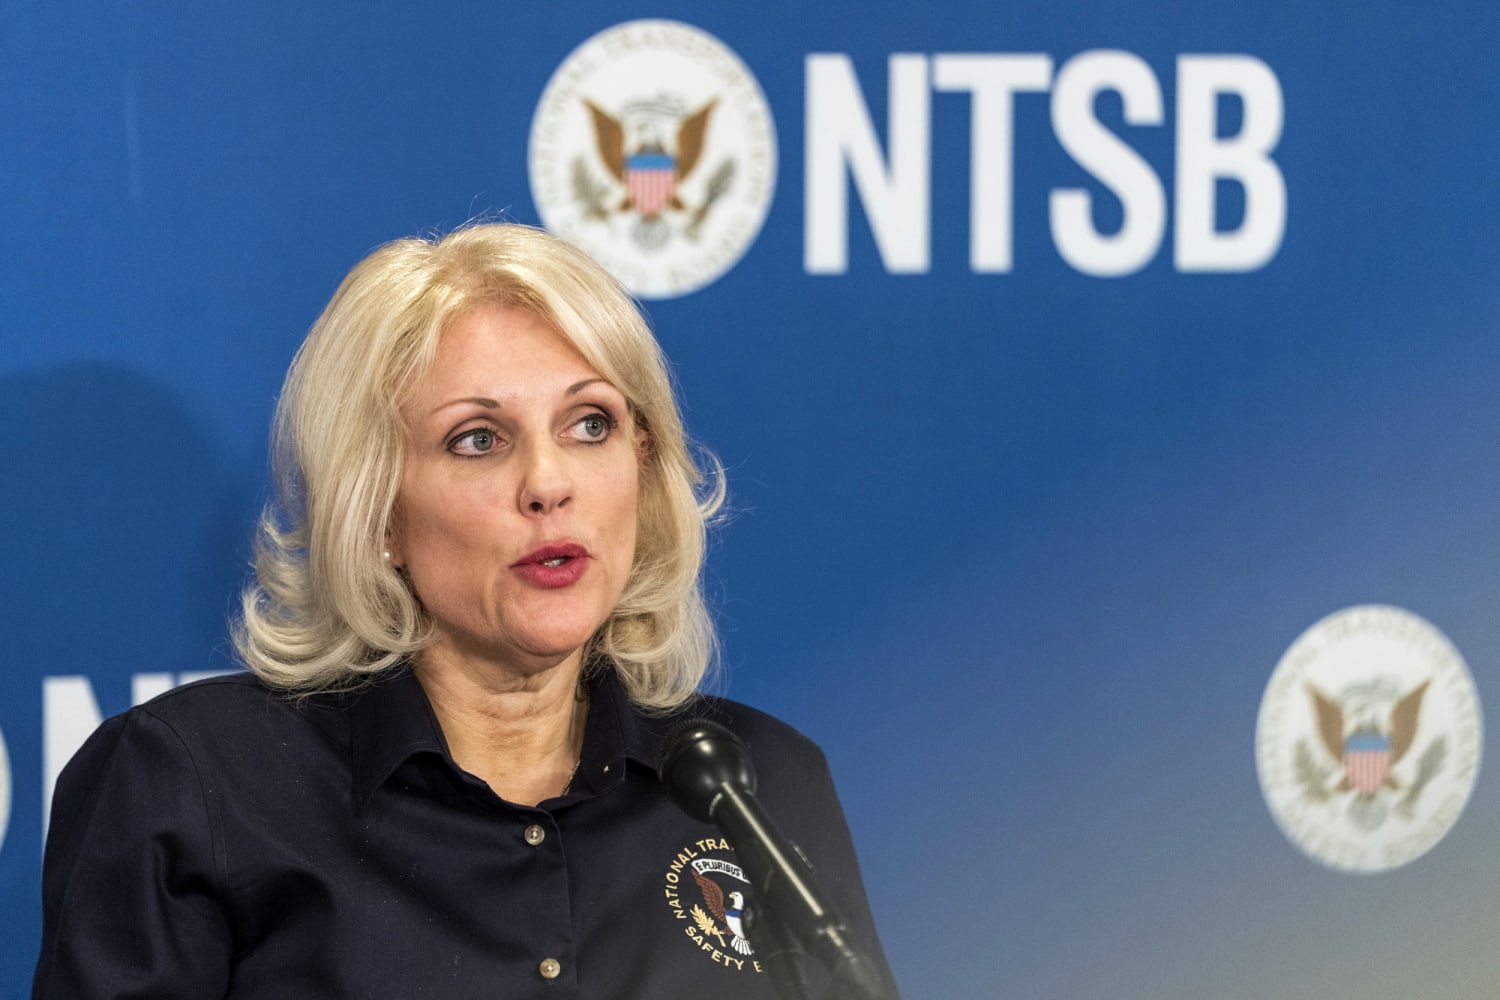 NTSB chair says trains need more image and audio recorders after Ohio derailment